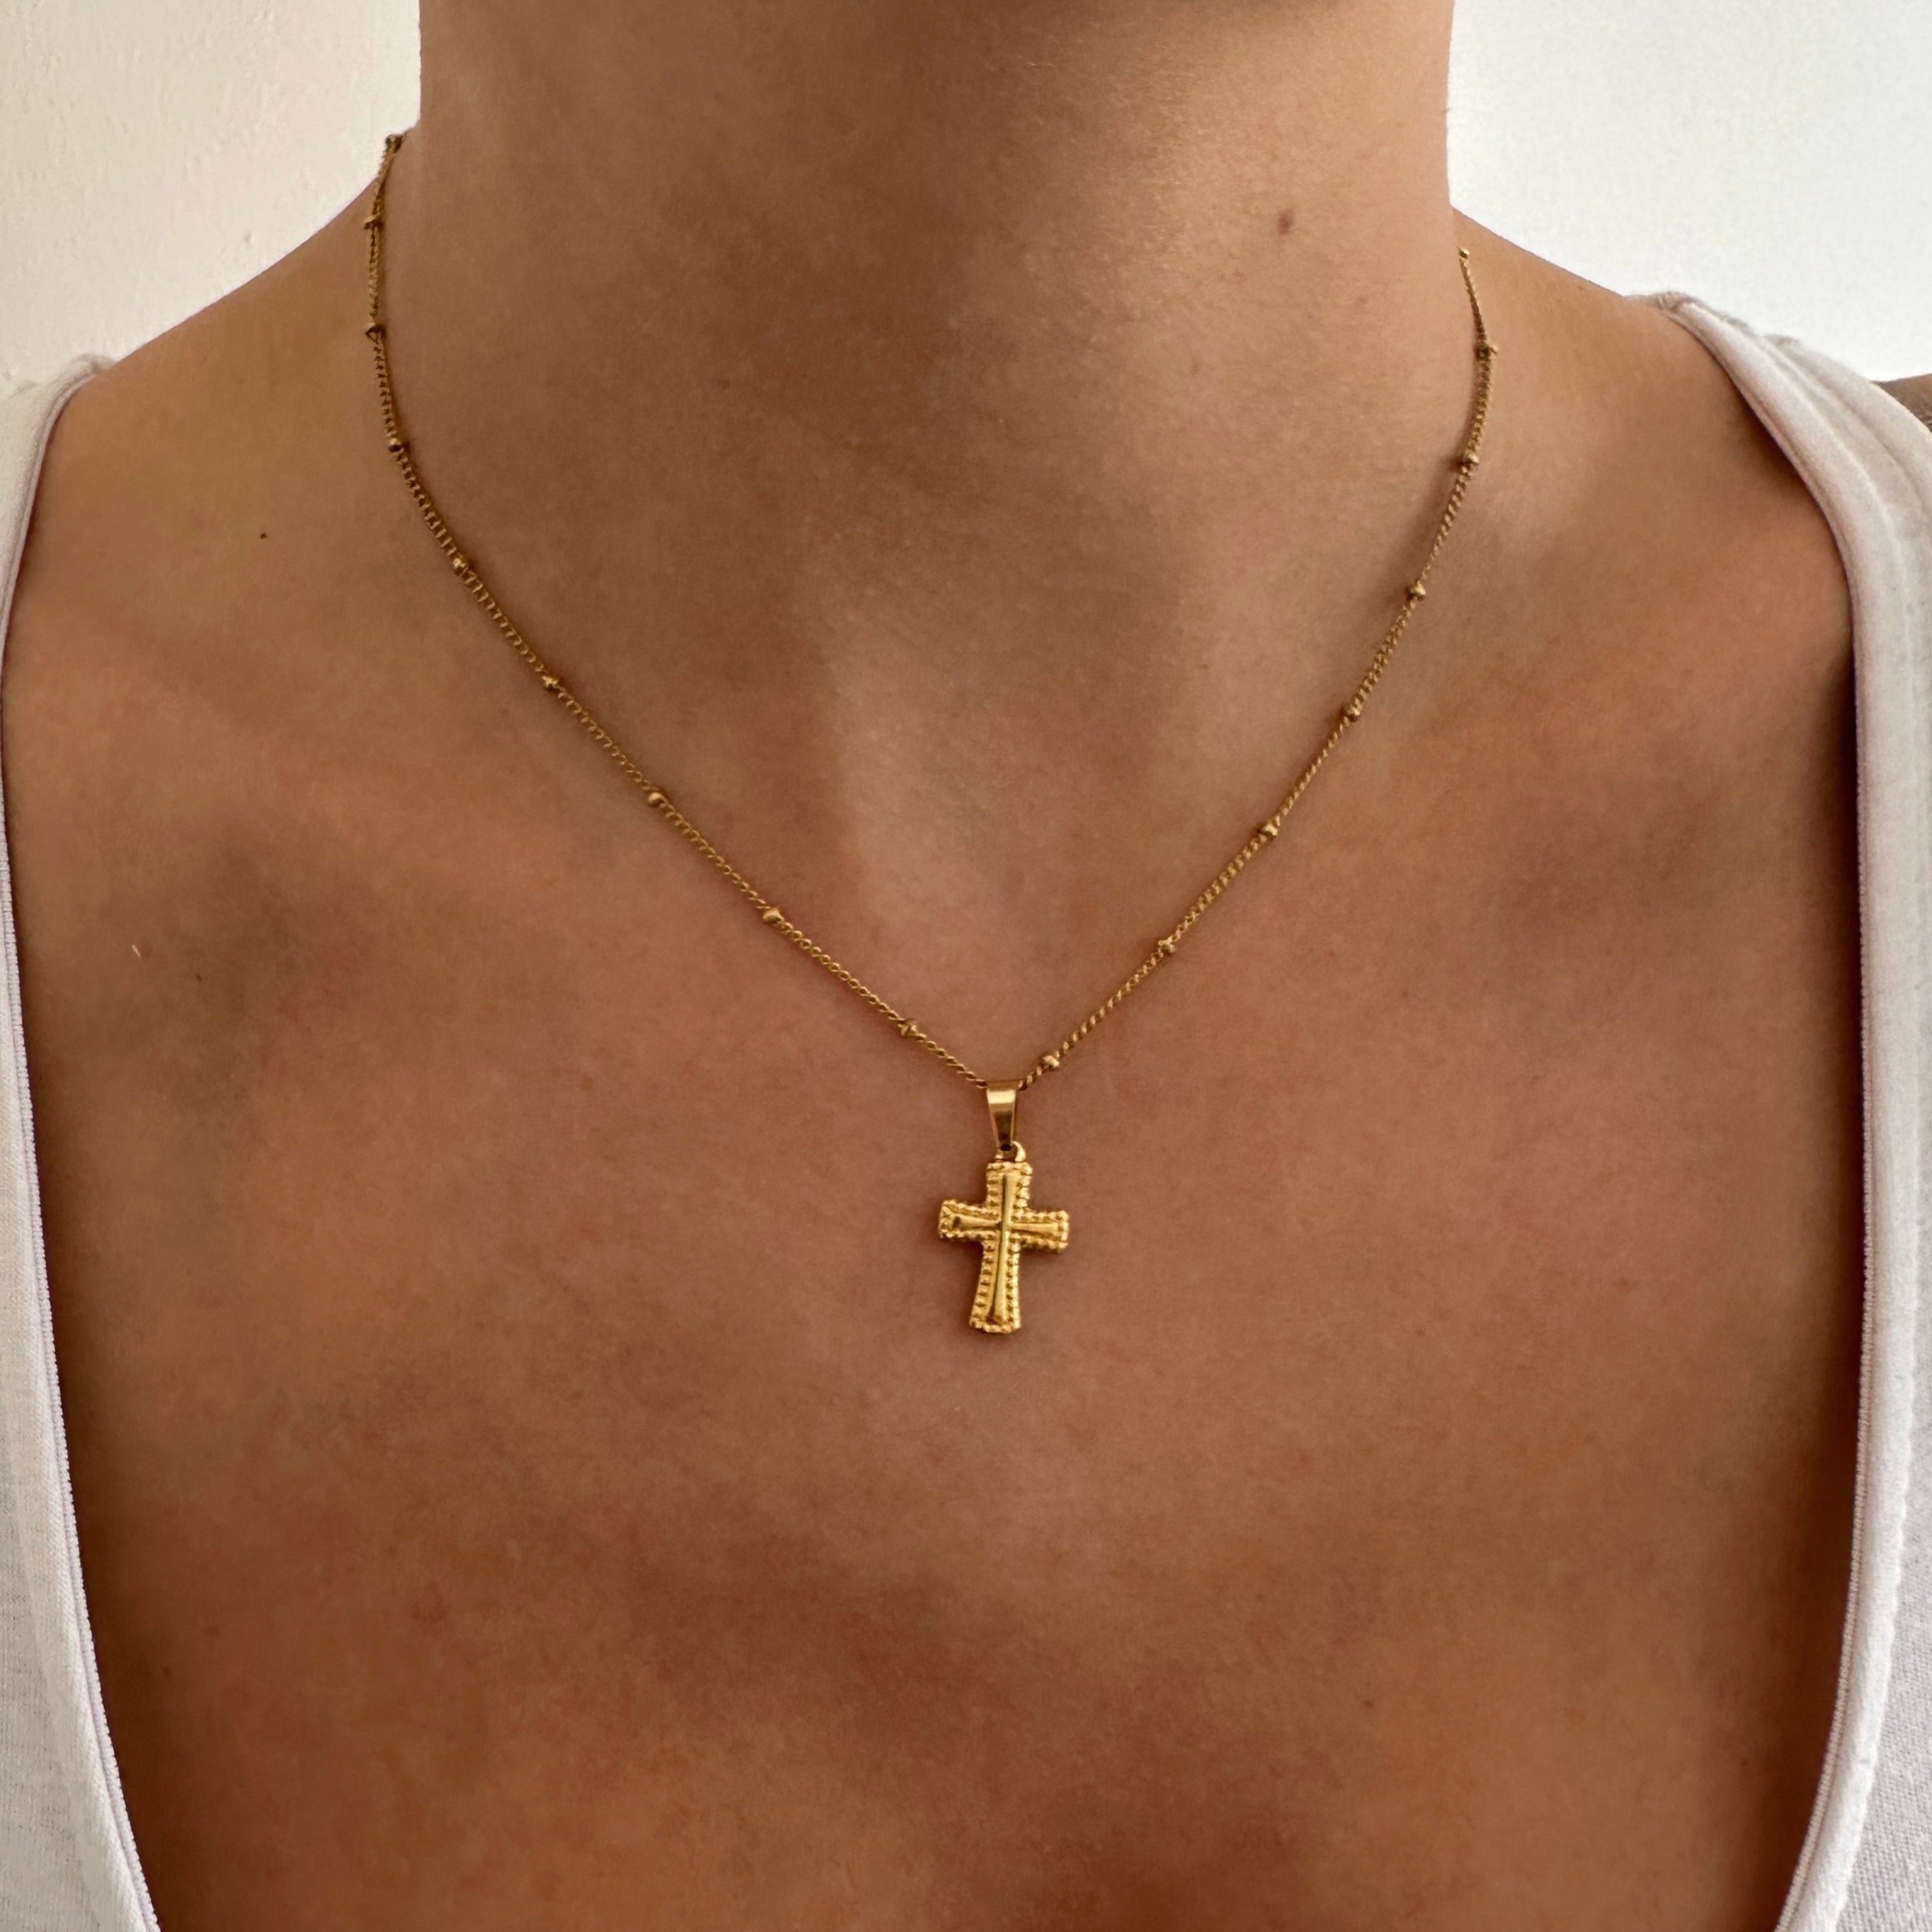 Woman Wearing Gold Cross Necklace with Confidence - Empower your style with this stunning and meaningful piece